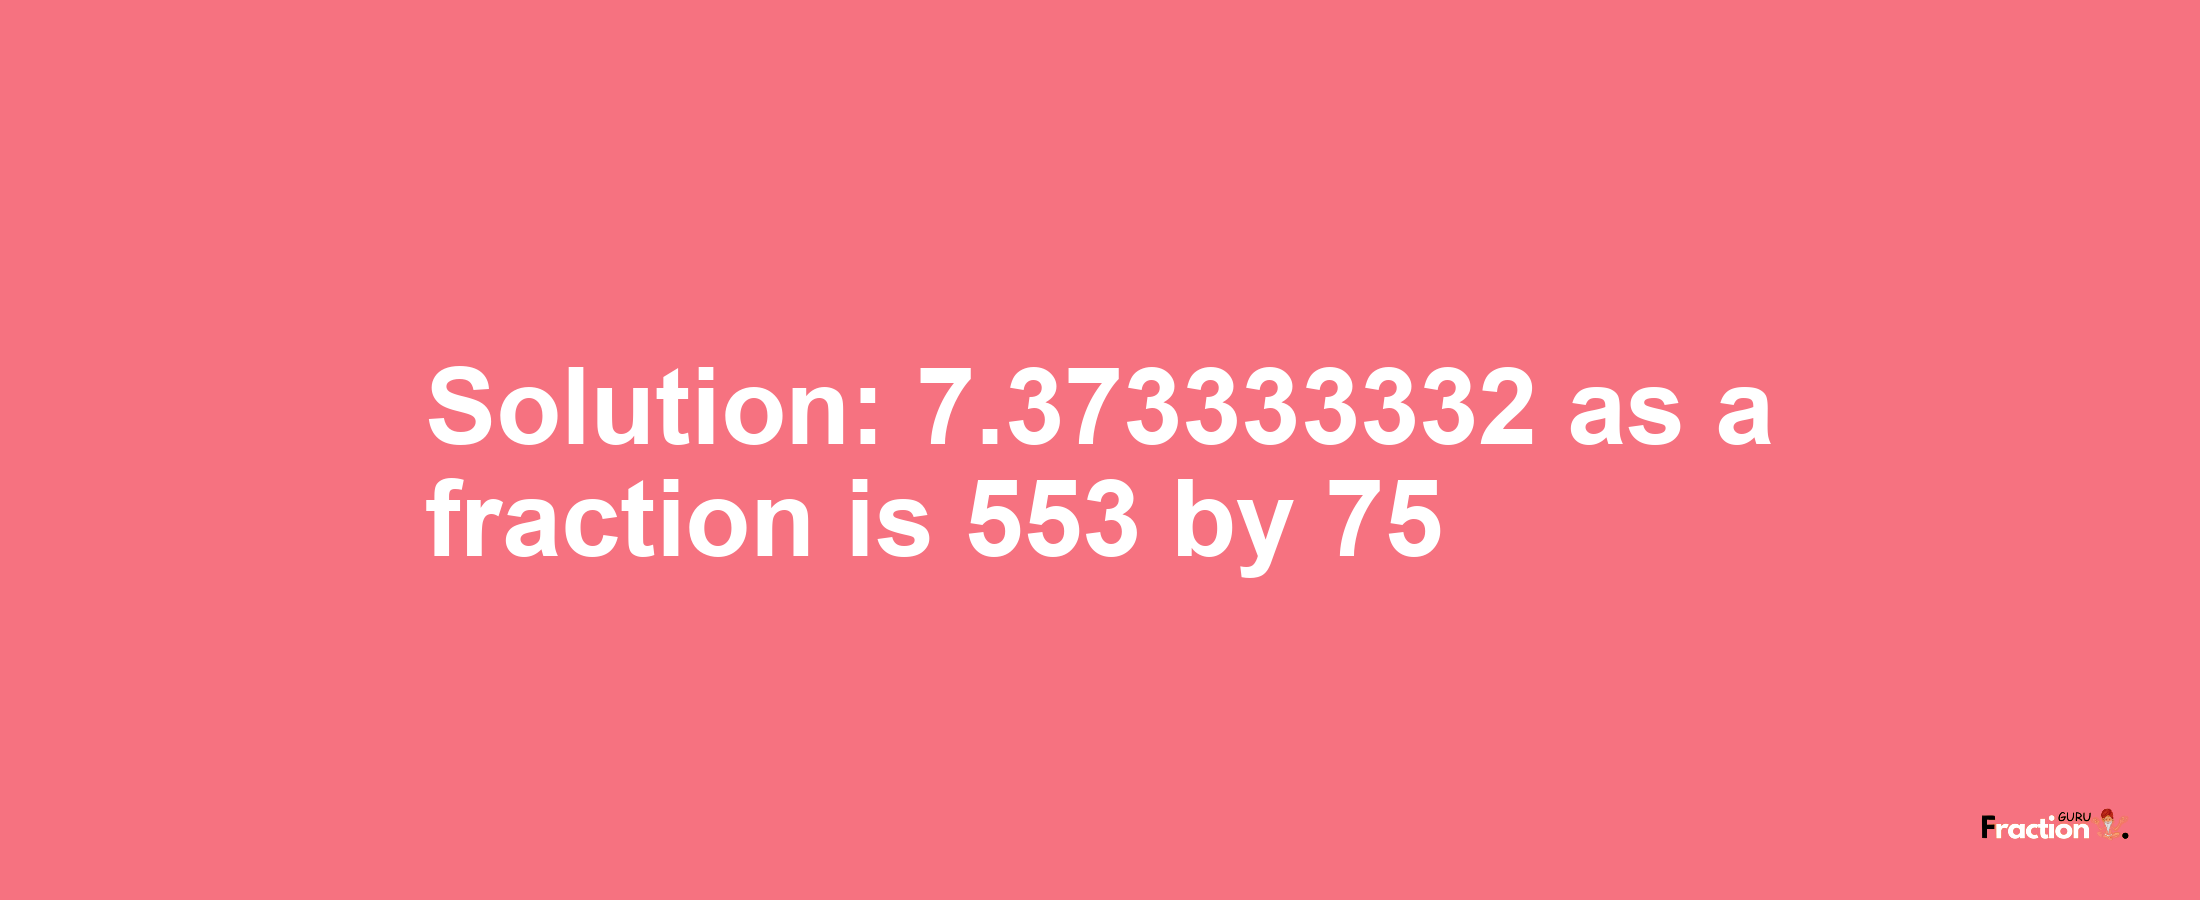 Solution:7.373333332 as a fraction is 553/75